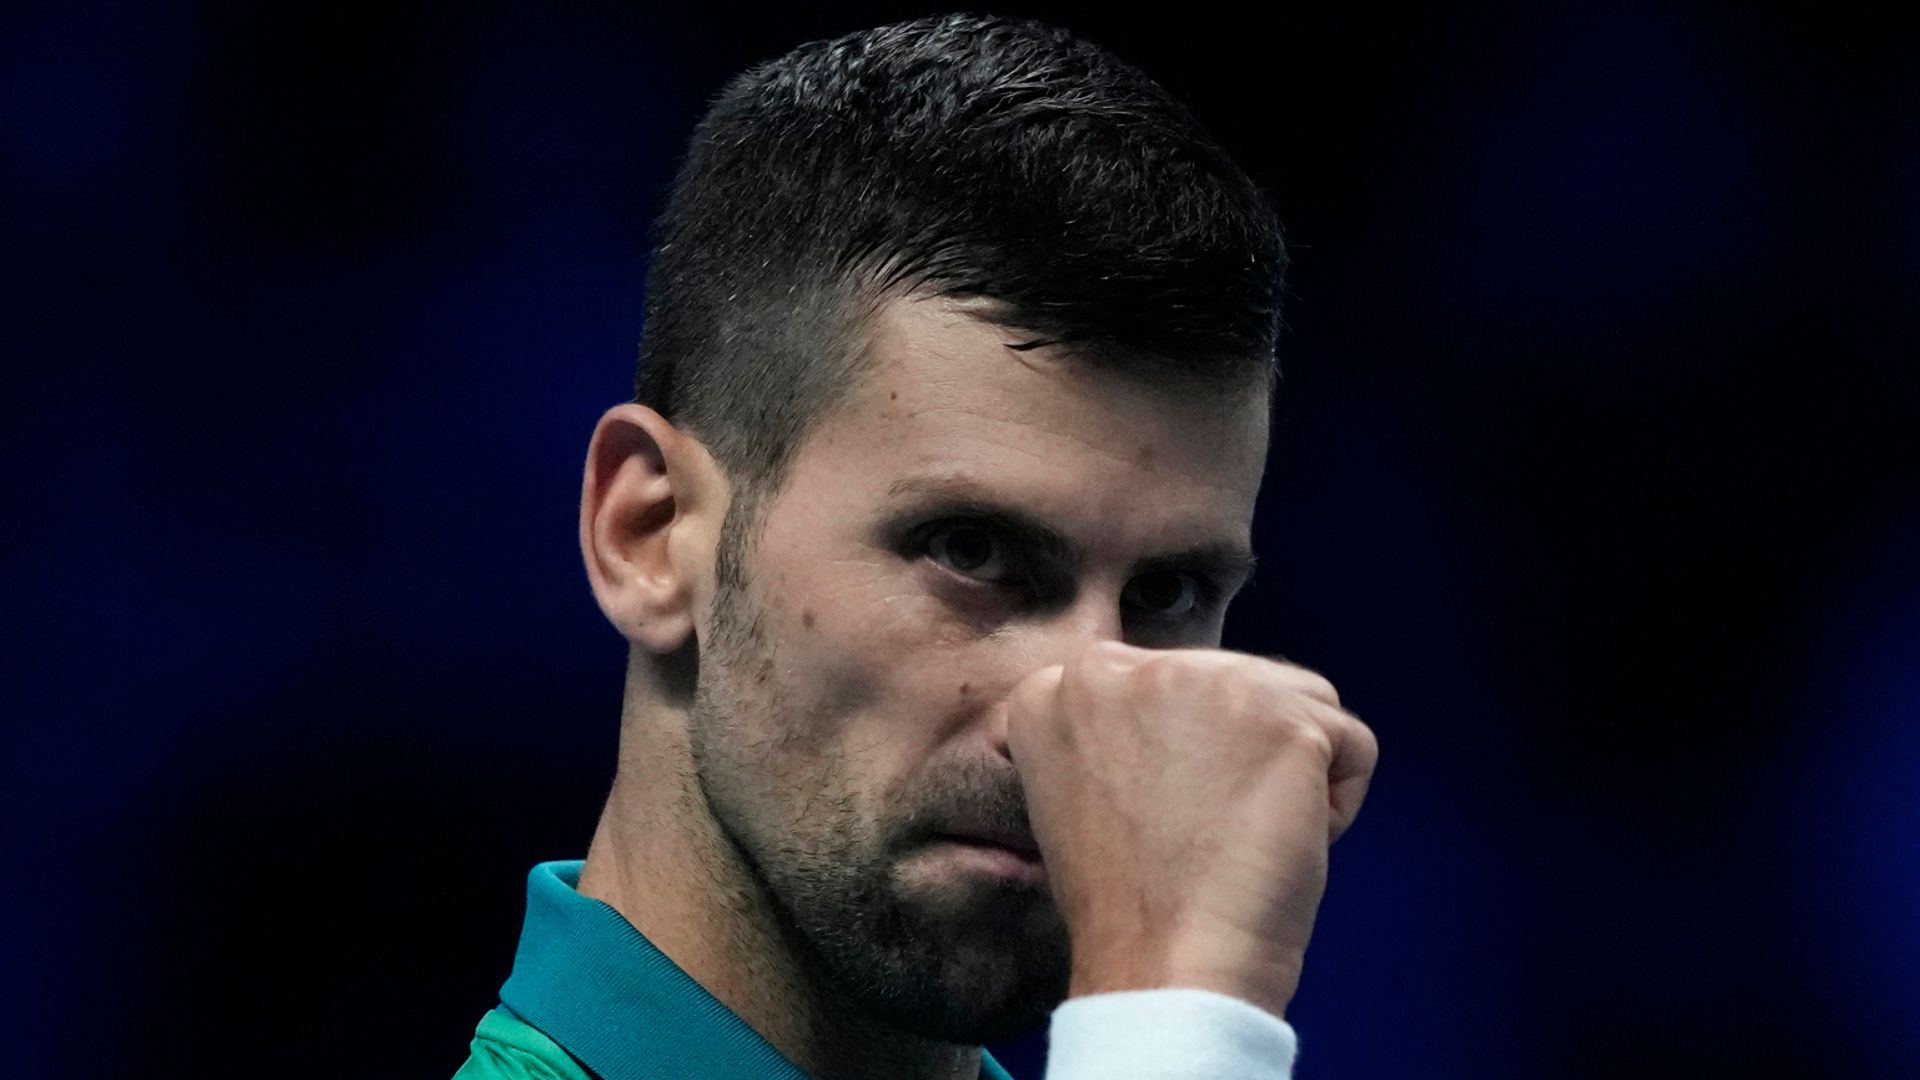 Djokovic to end year as No 1 after late-night win over Rune